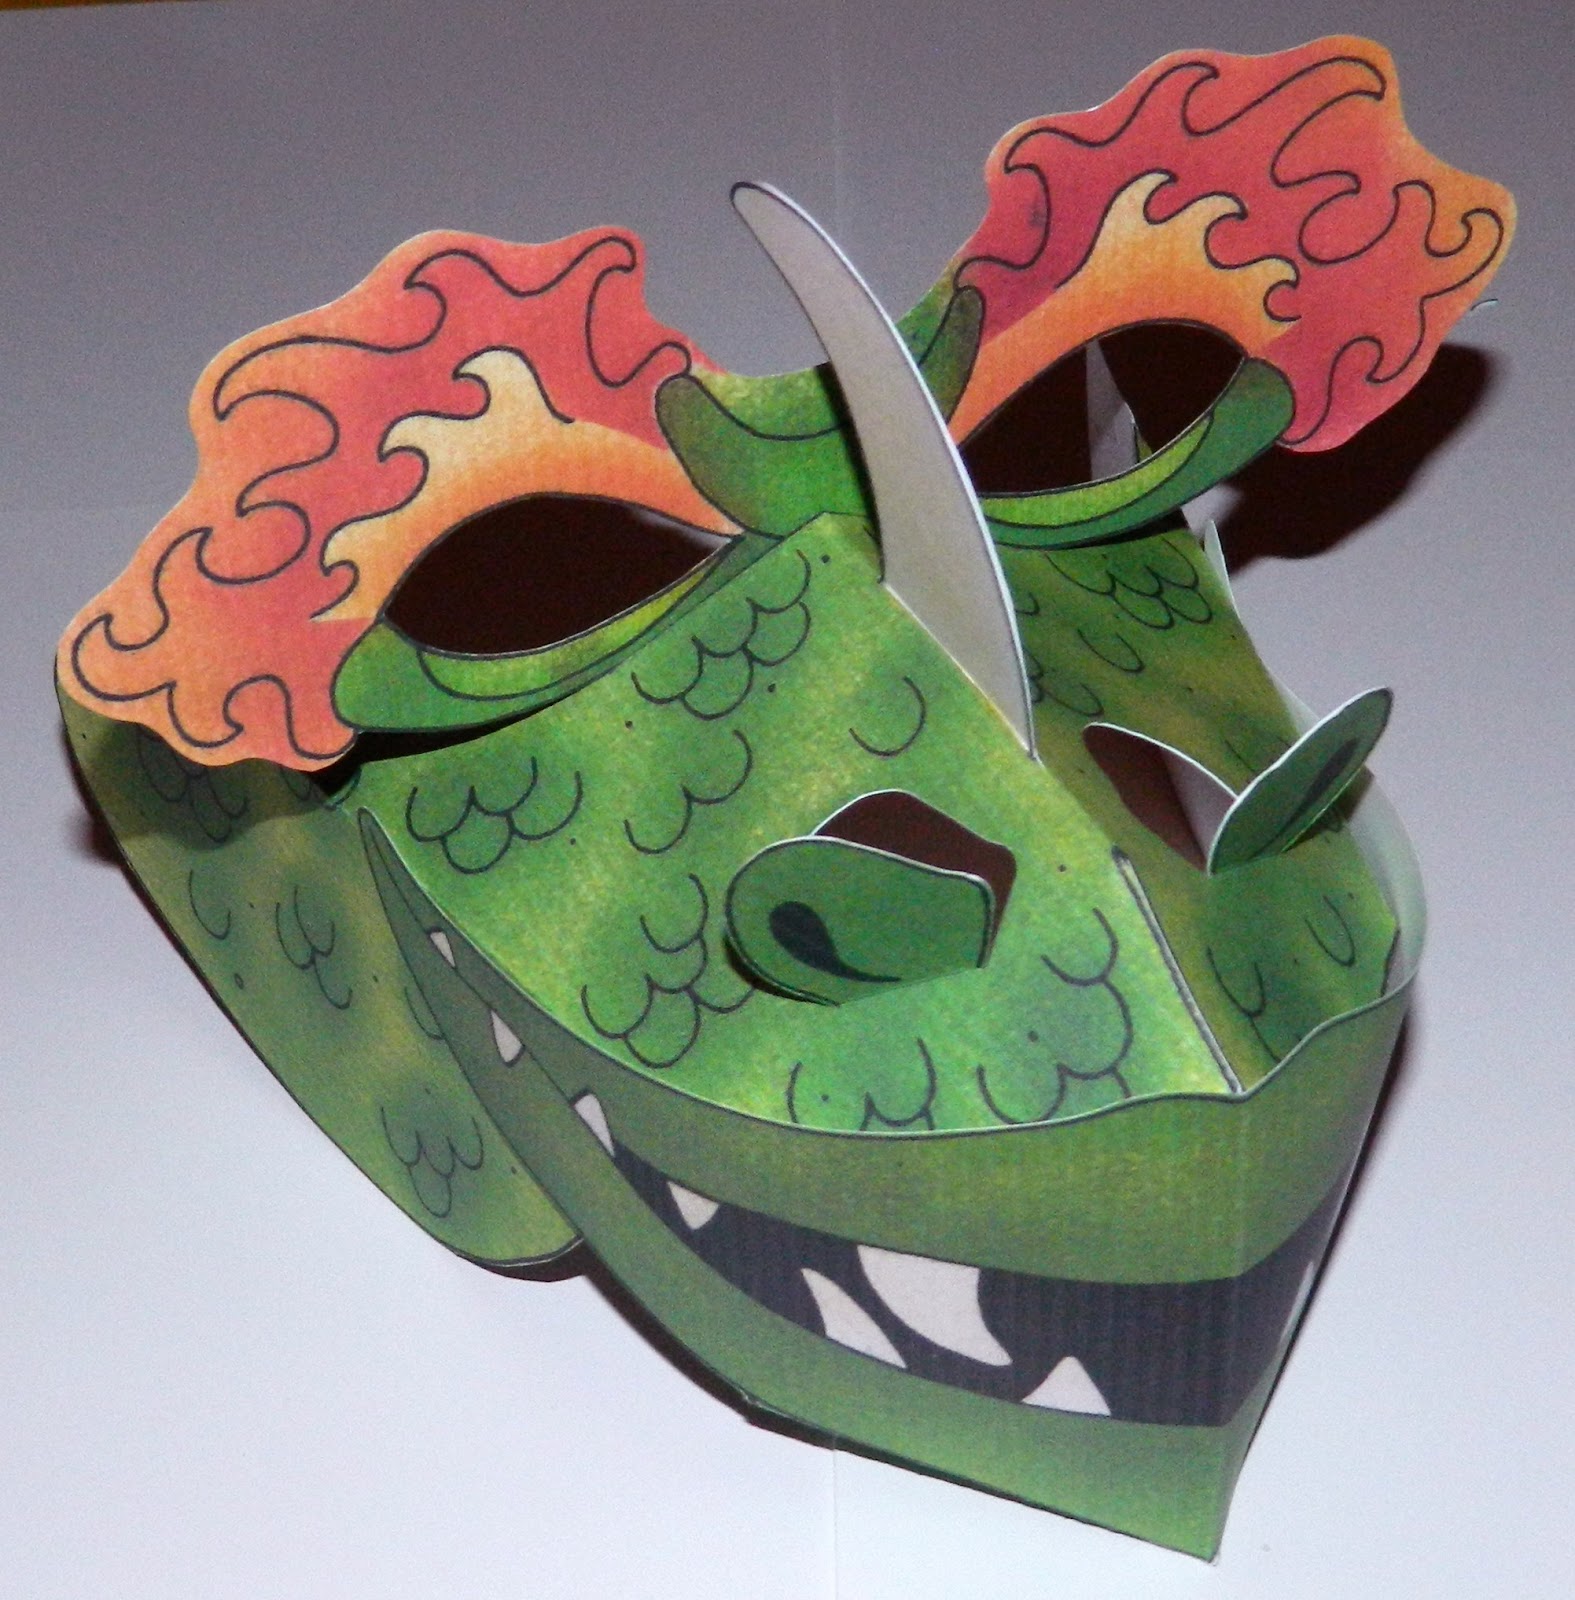 laura's frayed knot: dragon face mask